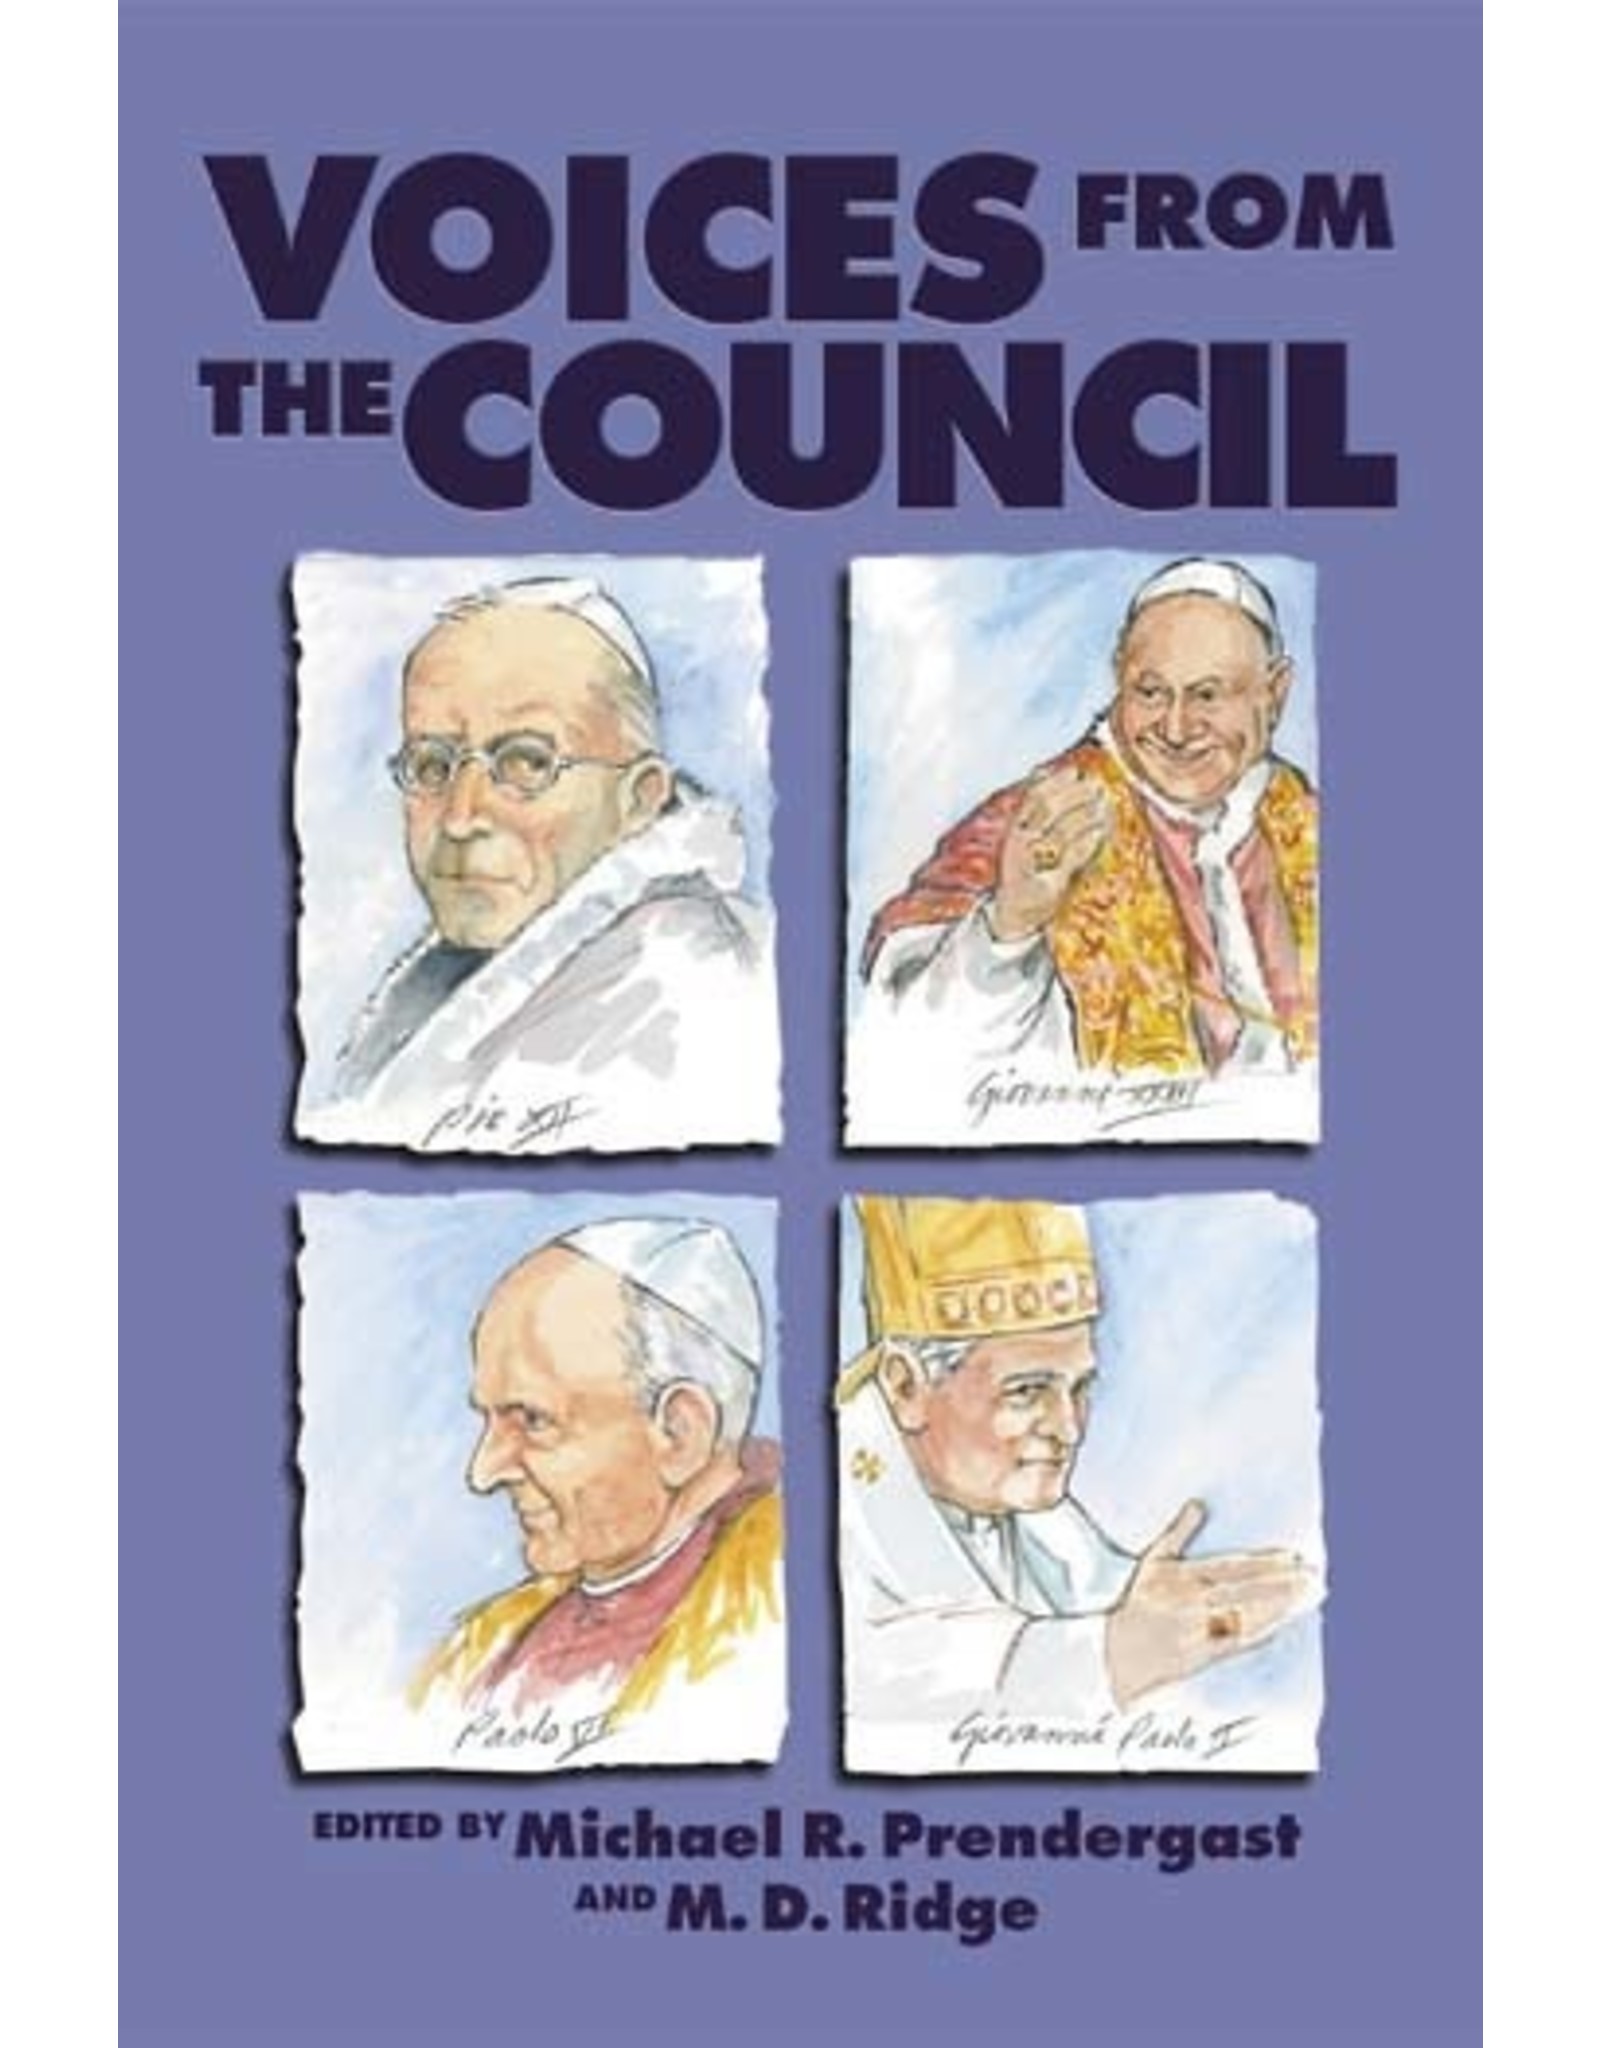 Voices from the Council